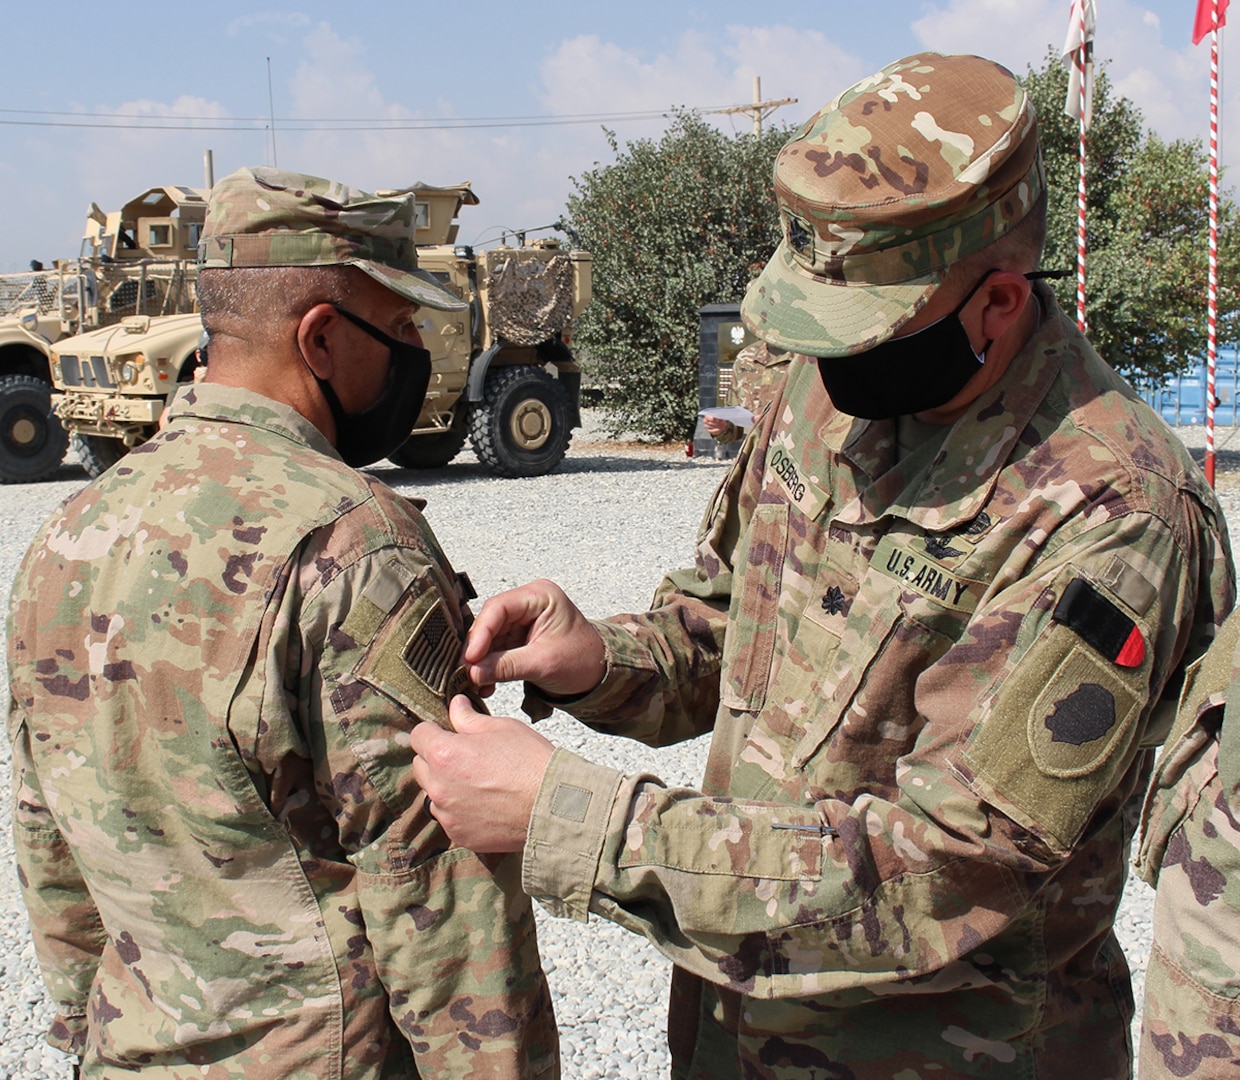 Lt. Col. Jason Osberg, of Champaign, Illinois, Commander, Bilateral Embedded Staff Team A25, presents Master Sgt. Adam Abdul, of Collinsville, Illinois, with his combat patch during the recent ceremony.